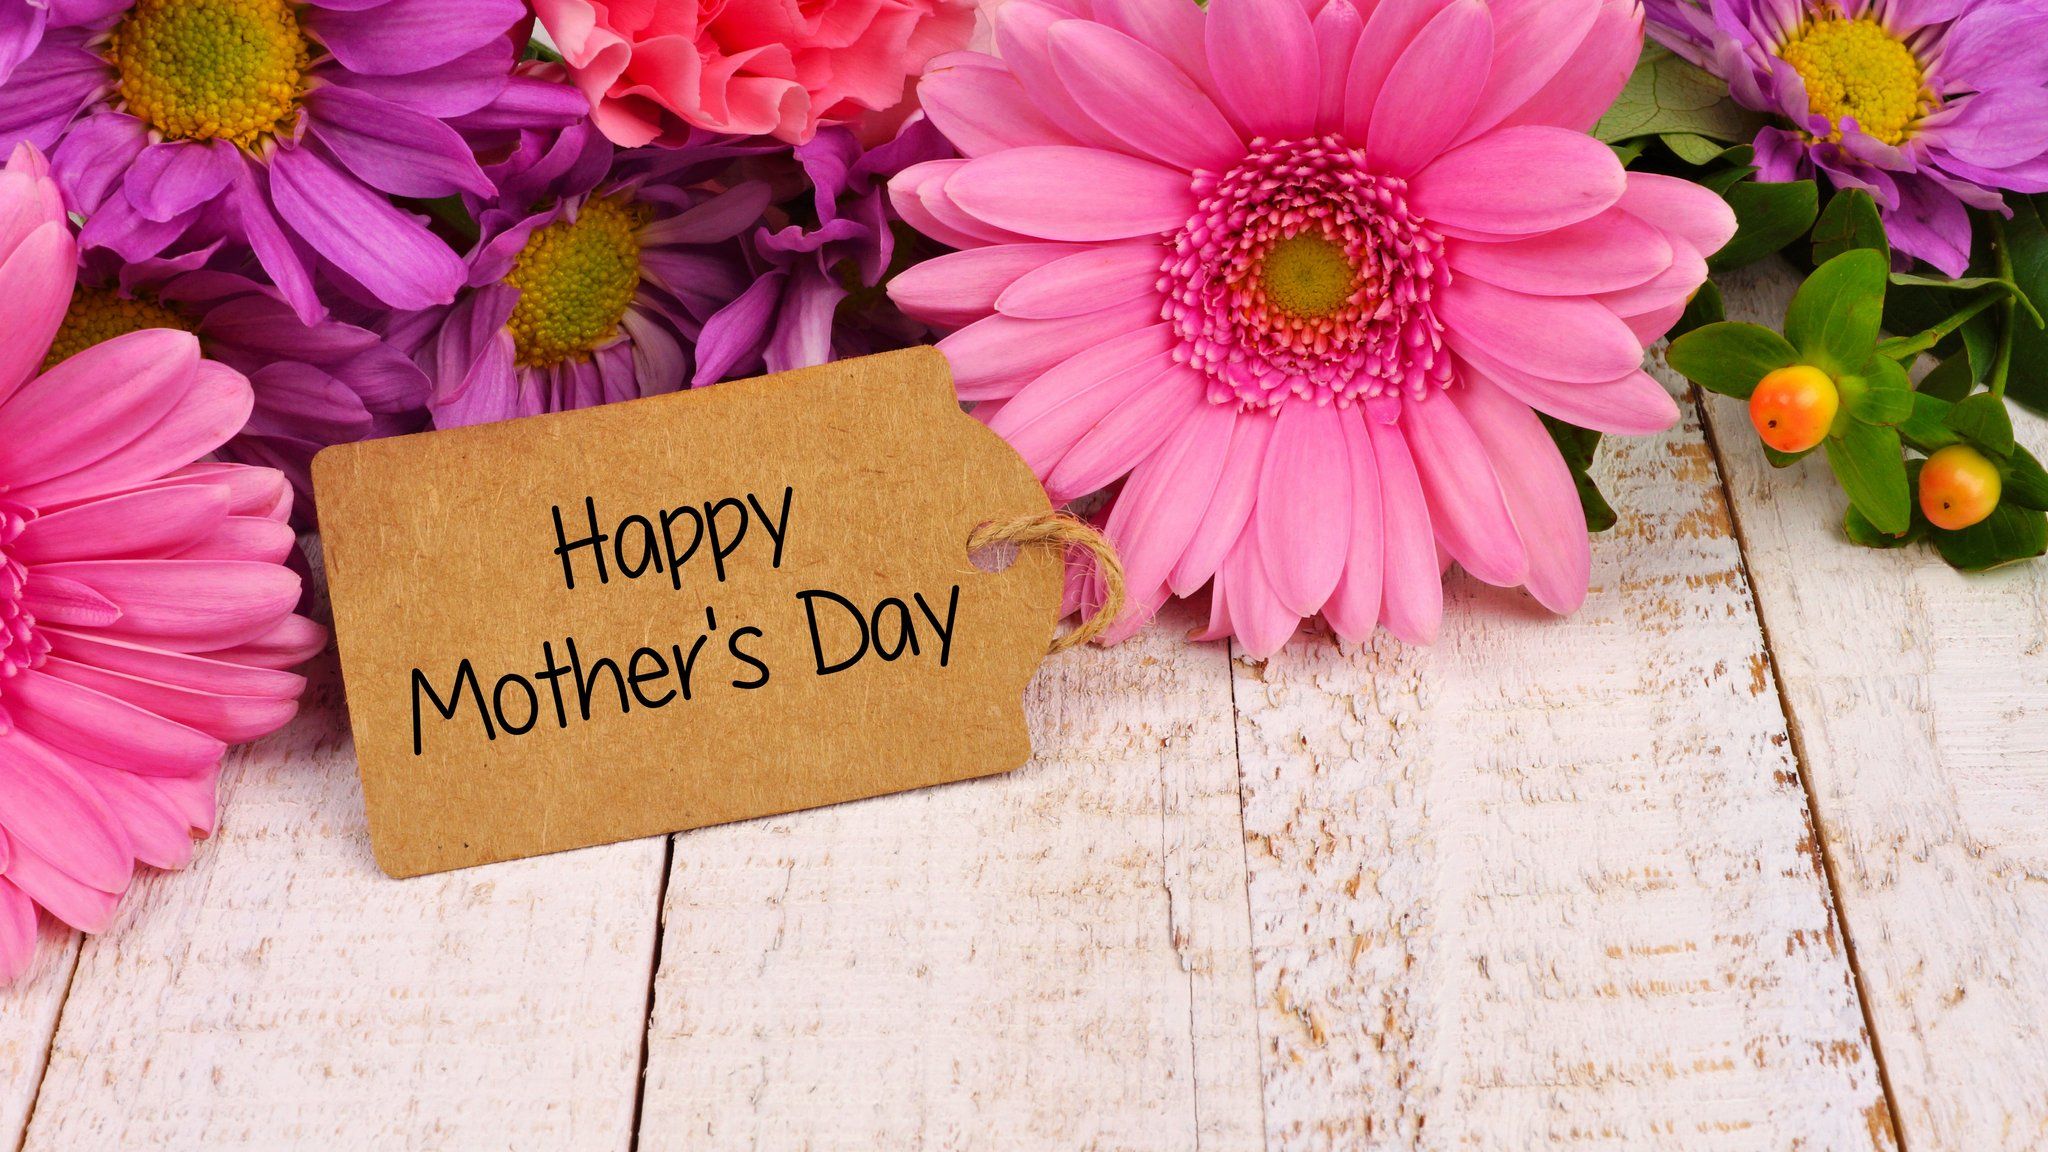 When is it Mother's Day in the UK?